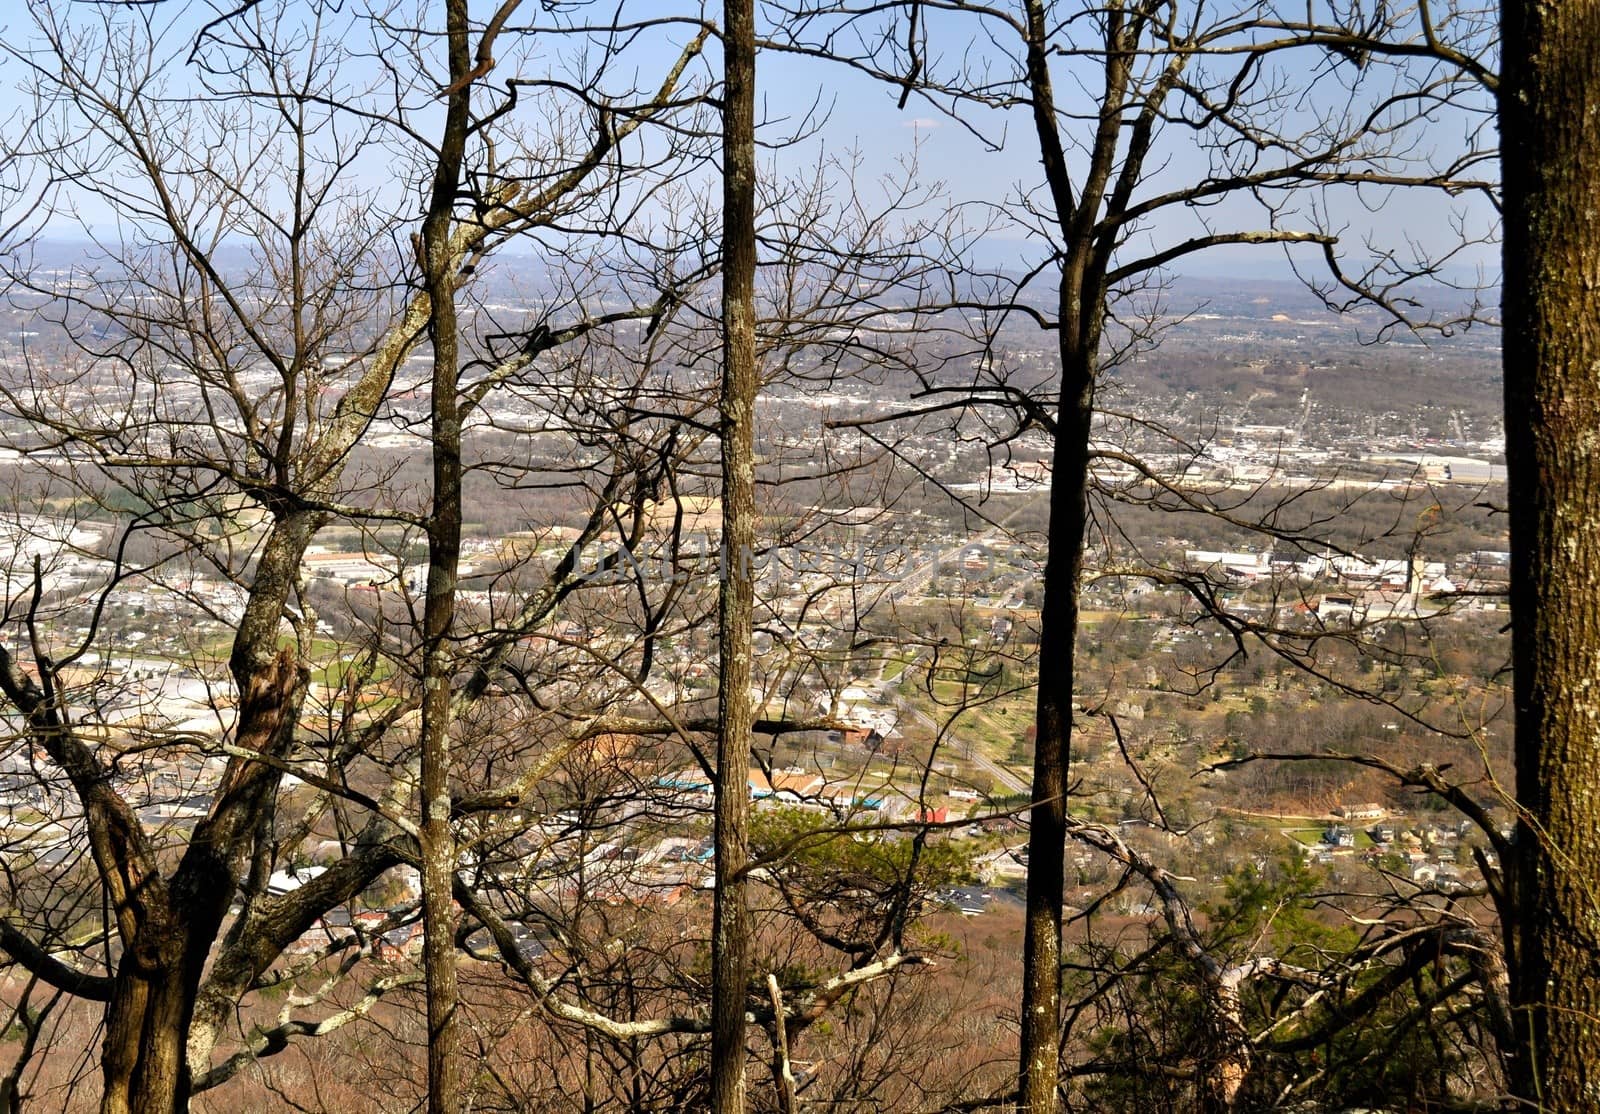 Chattanooga Tennessee through the trees